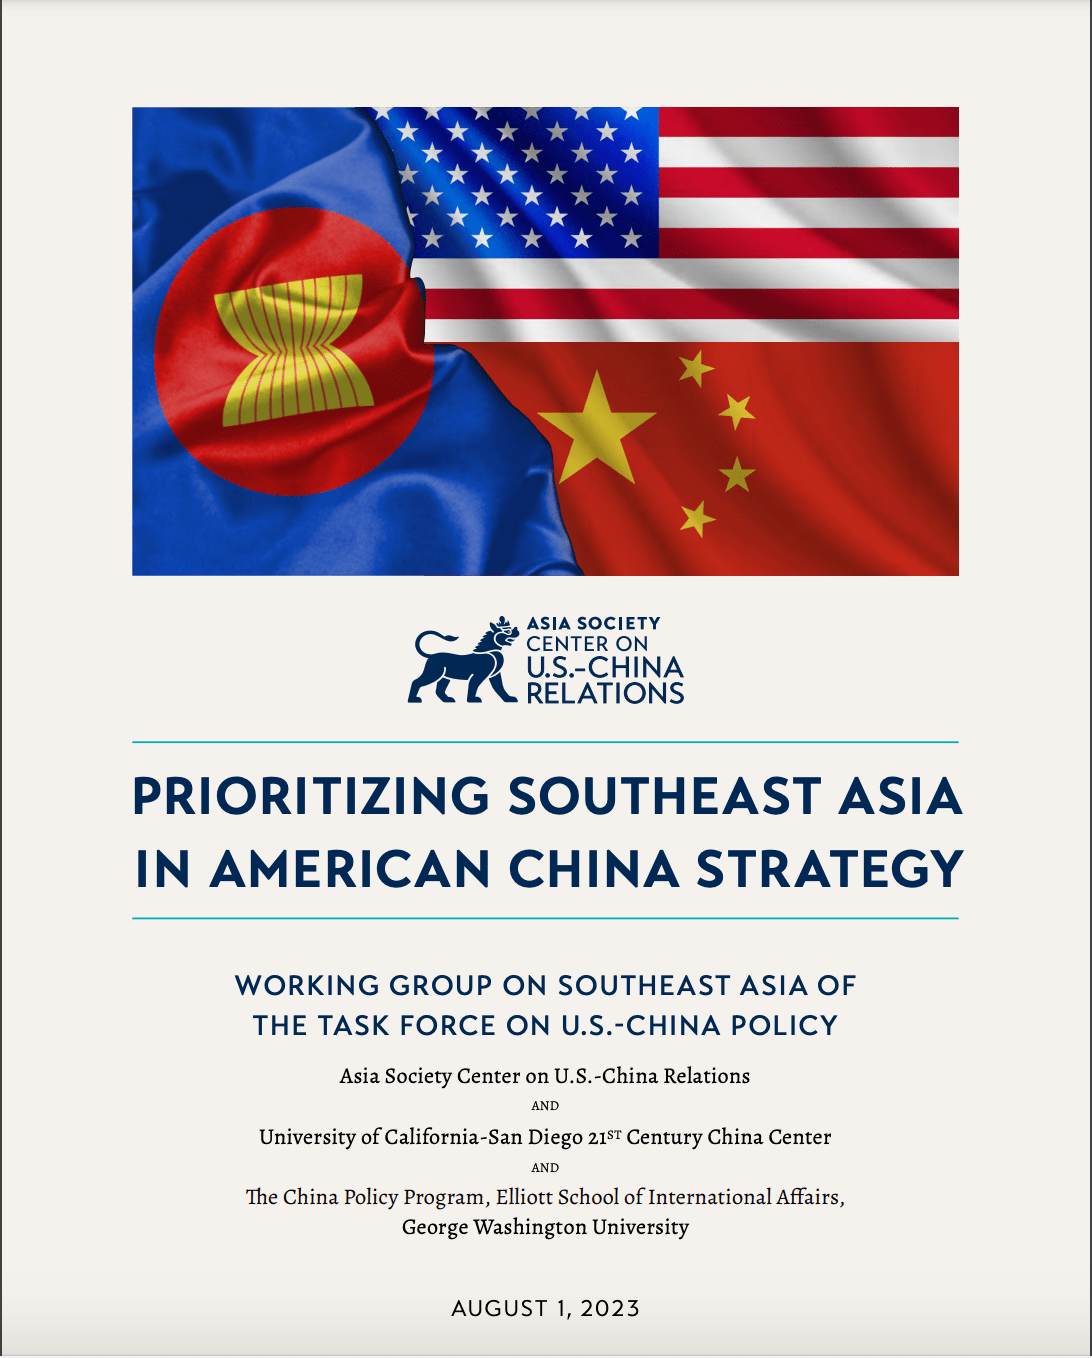 The cover of the report that says "Prioritizing Southeast Asia in American China Strategy"